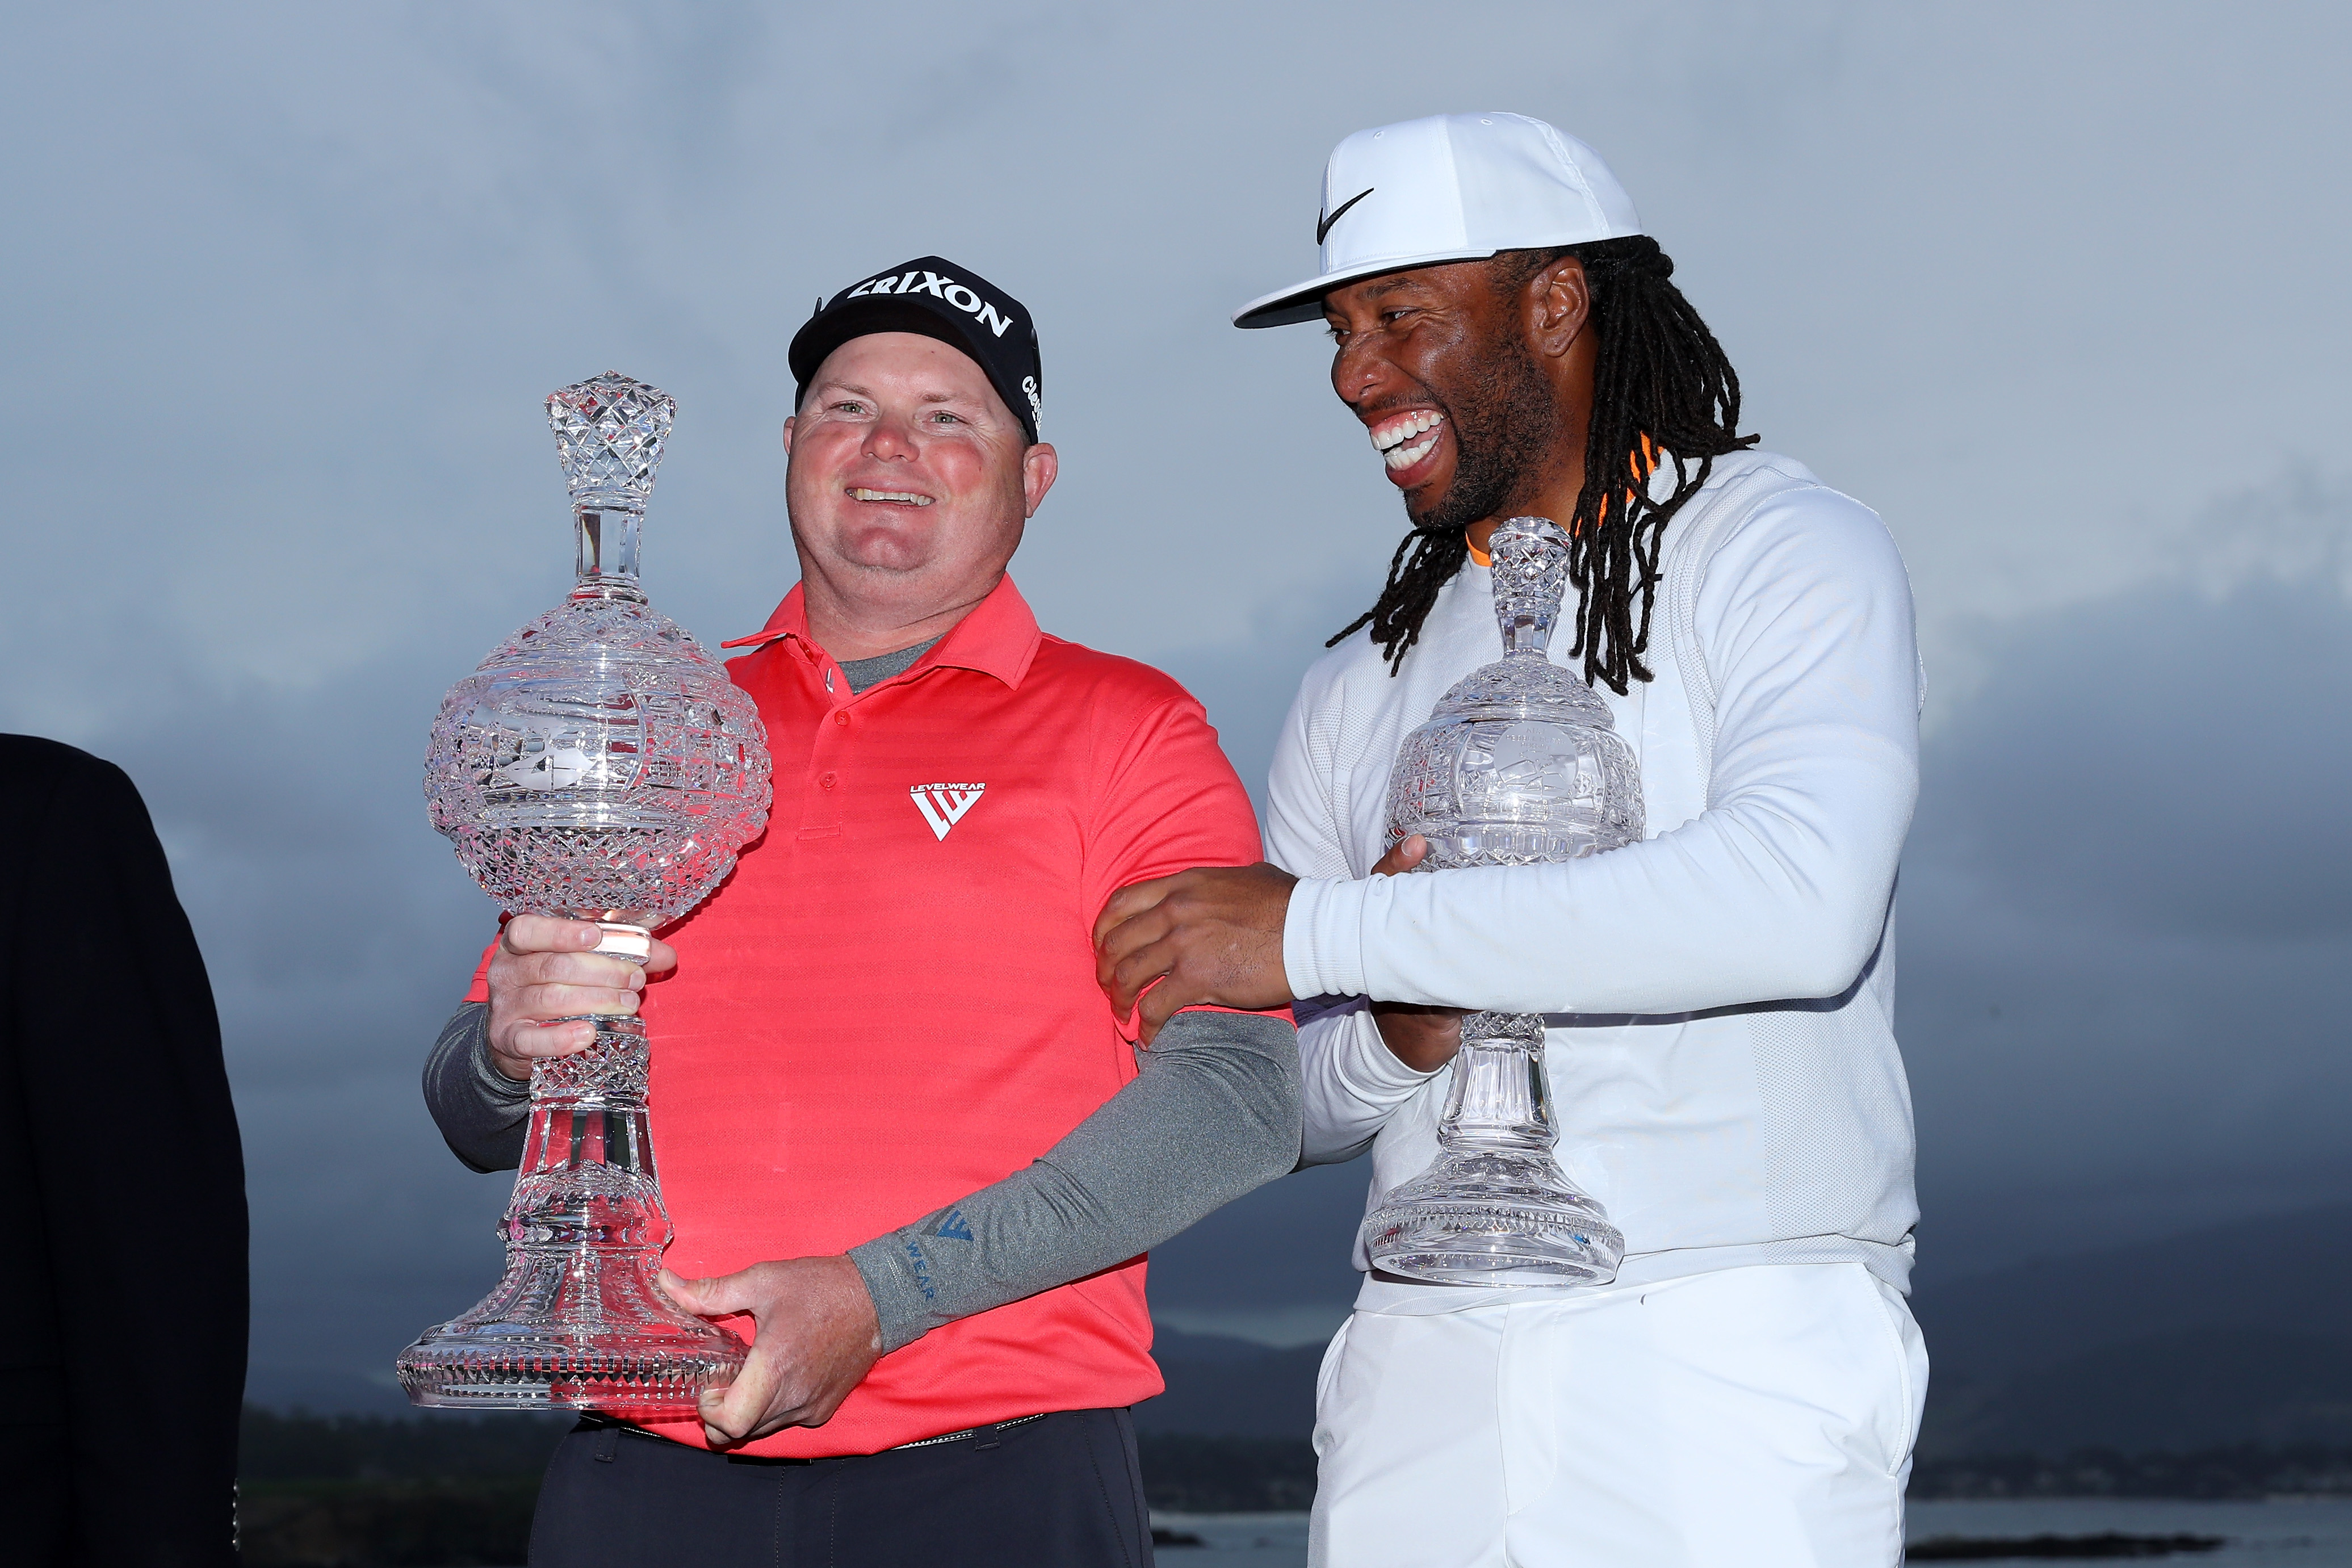 Call the handicap police! Larry Fitzgerald once again leads at Pebble Beach  (UPDATE: He won again), This is the Loop